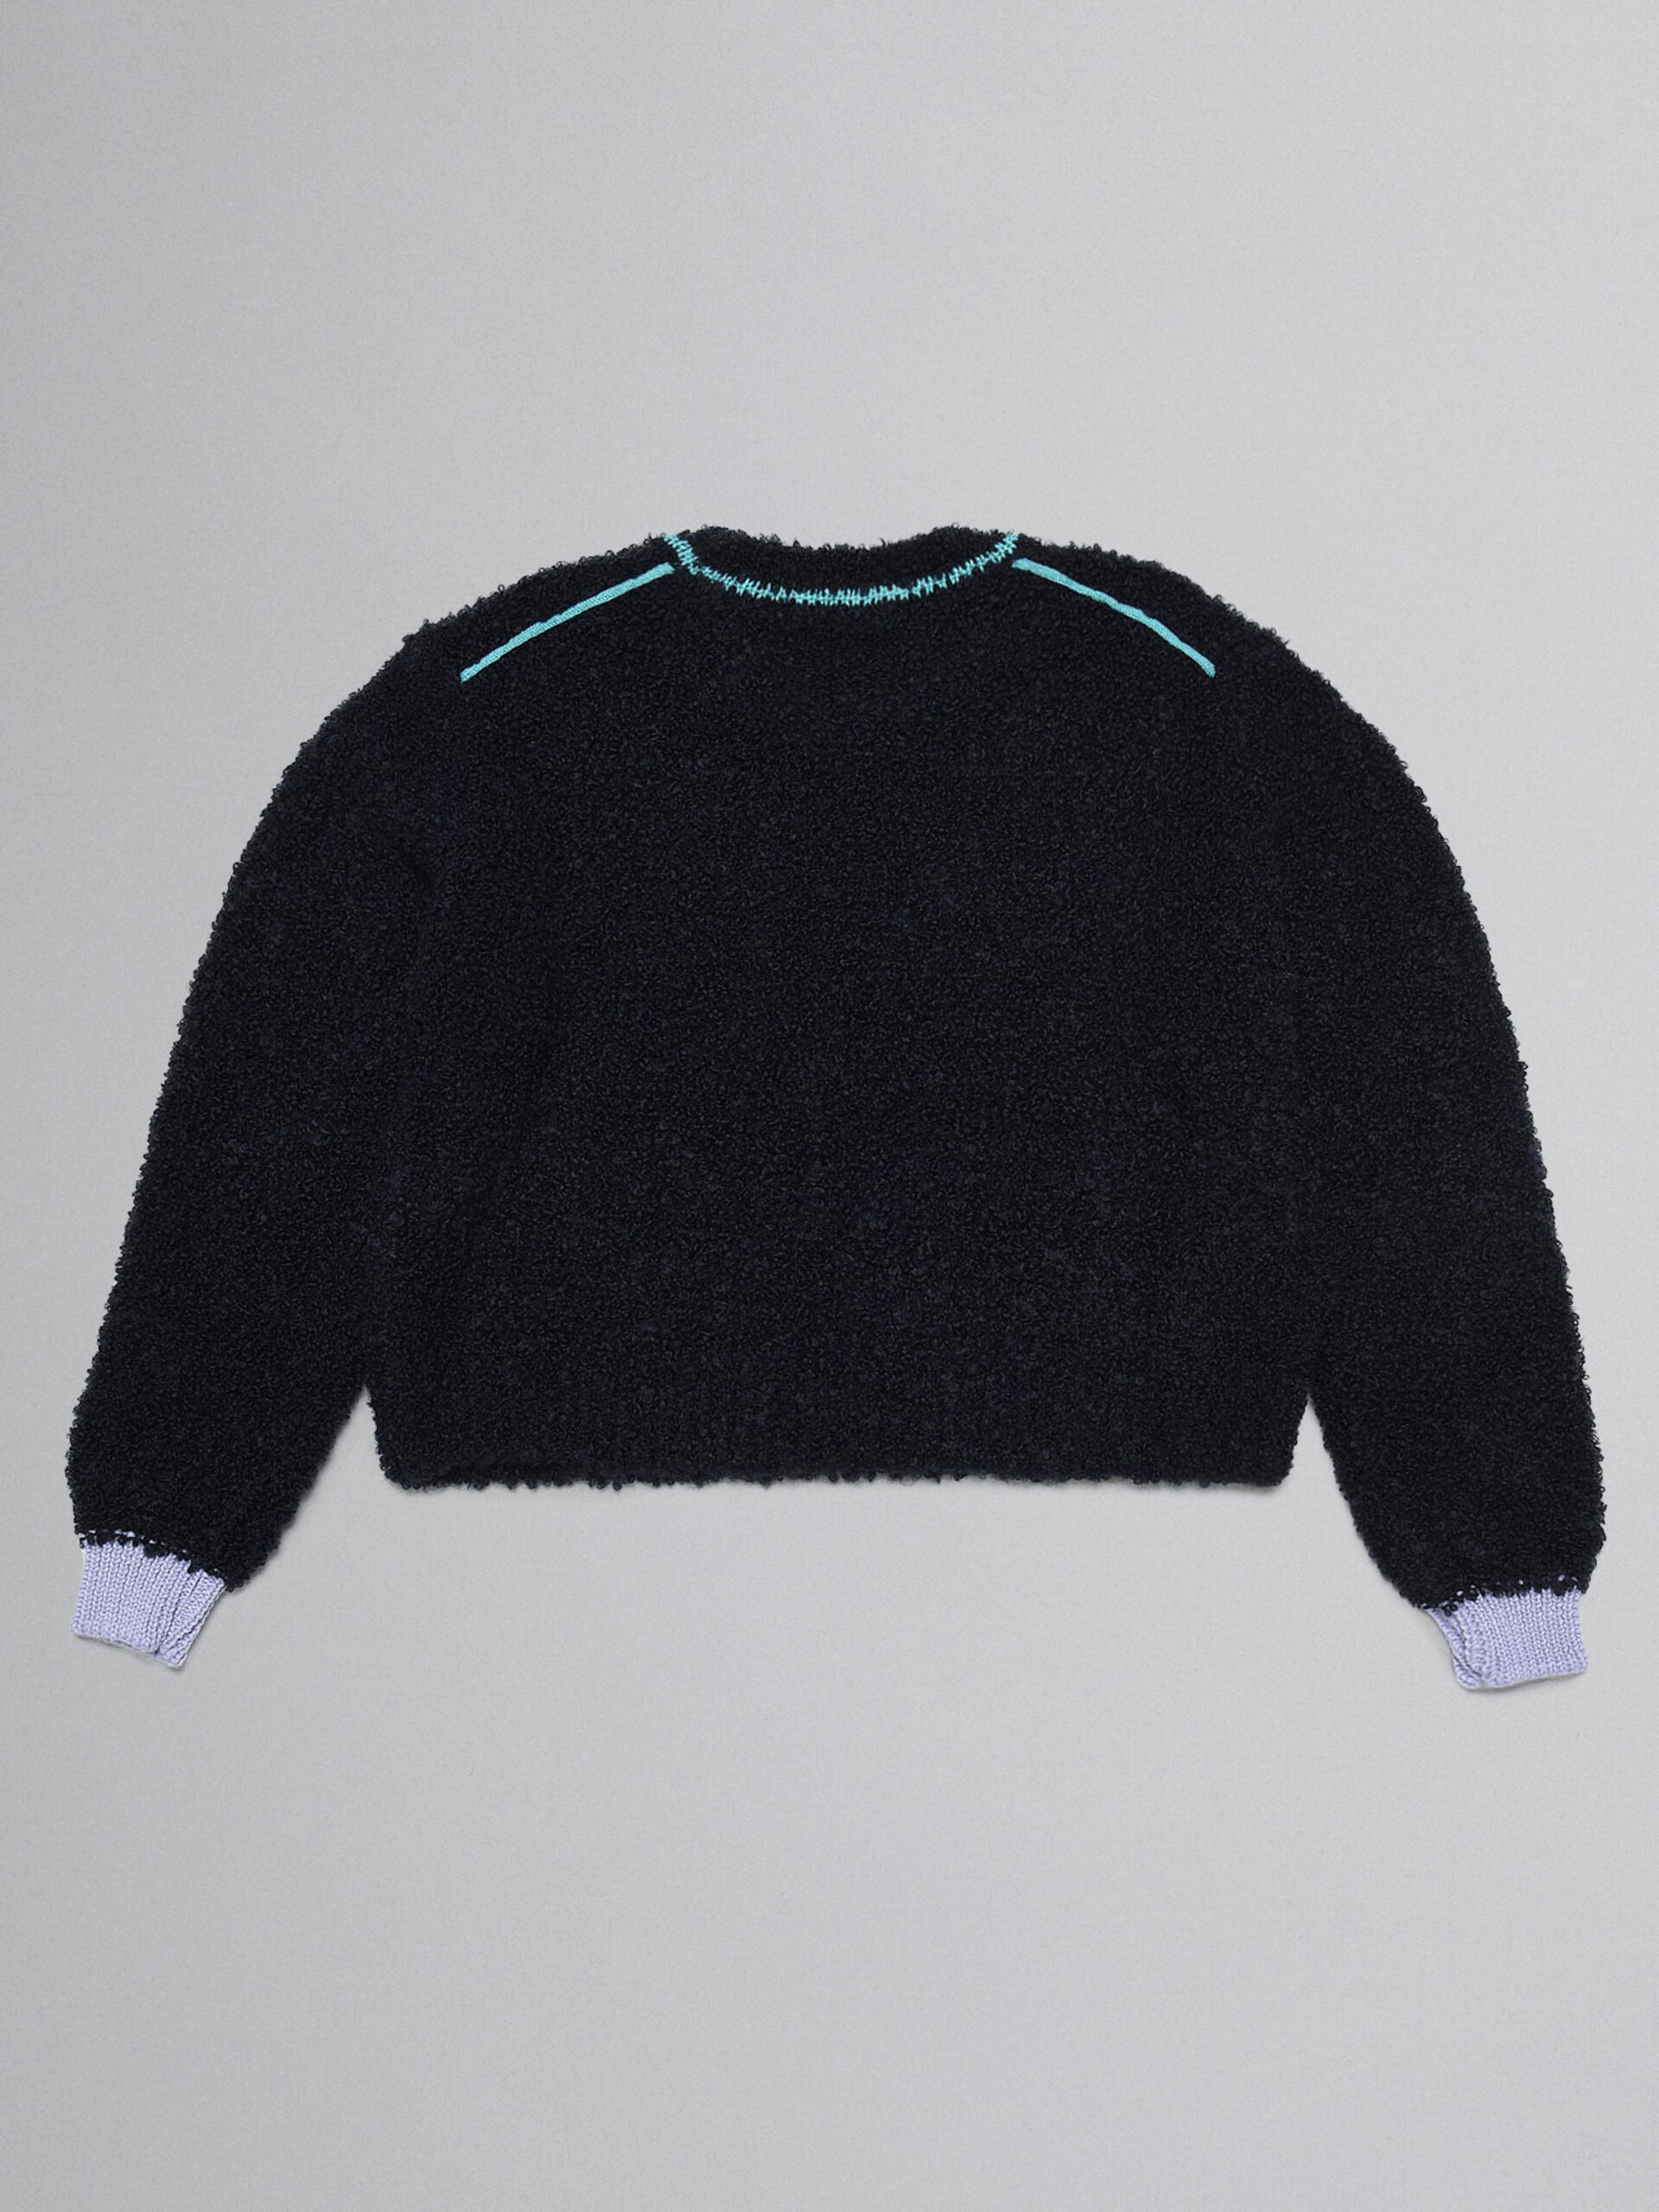 Navy blue teddy sweater with embroidery - Knitwear - Image 2